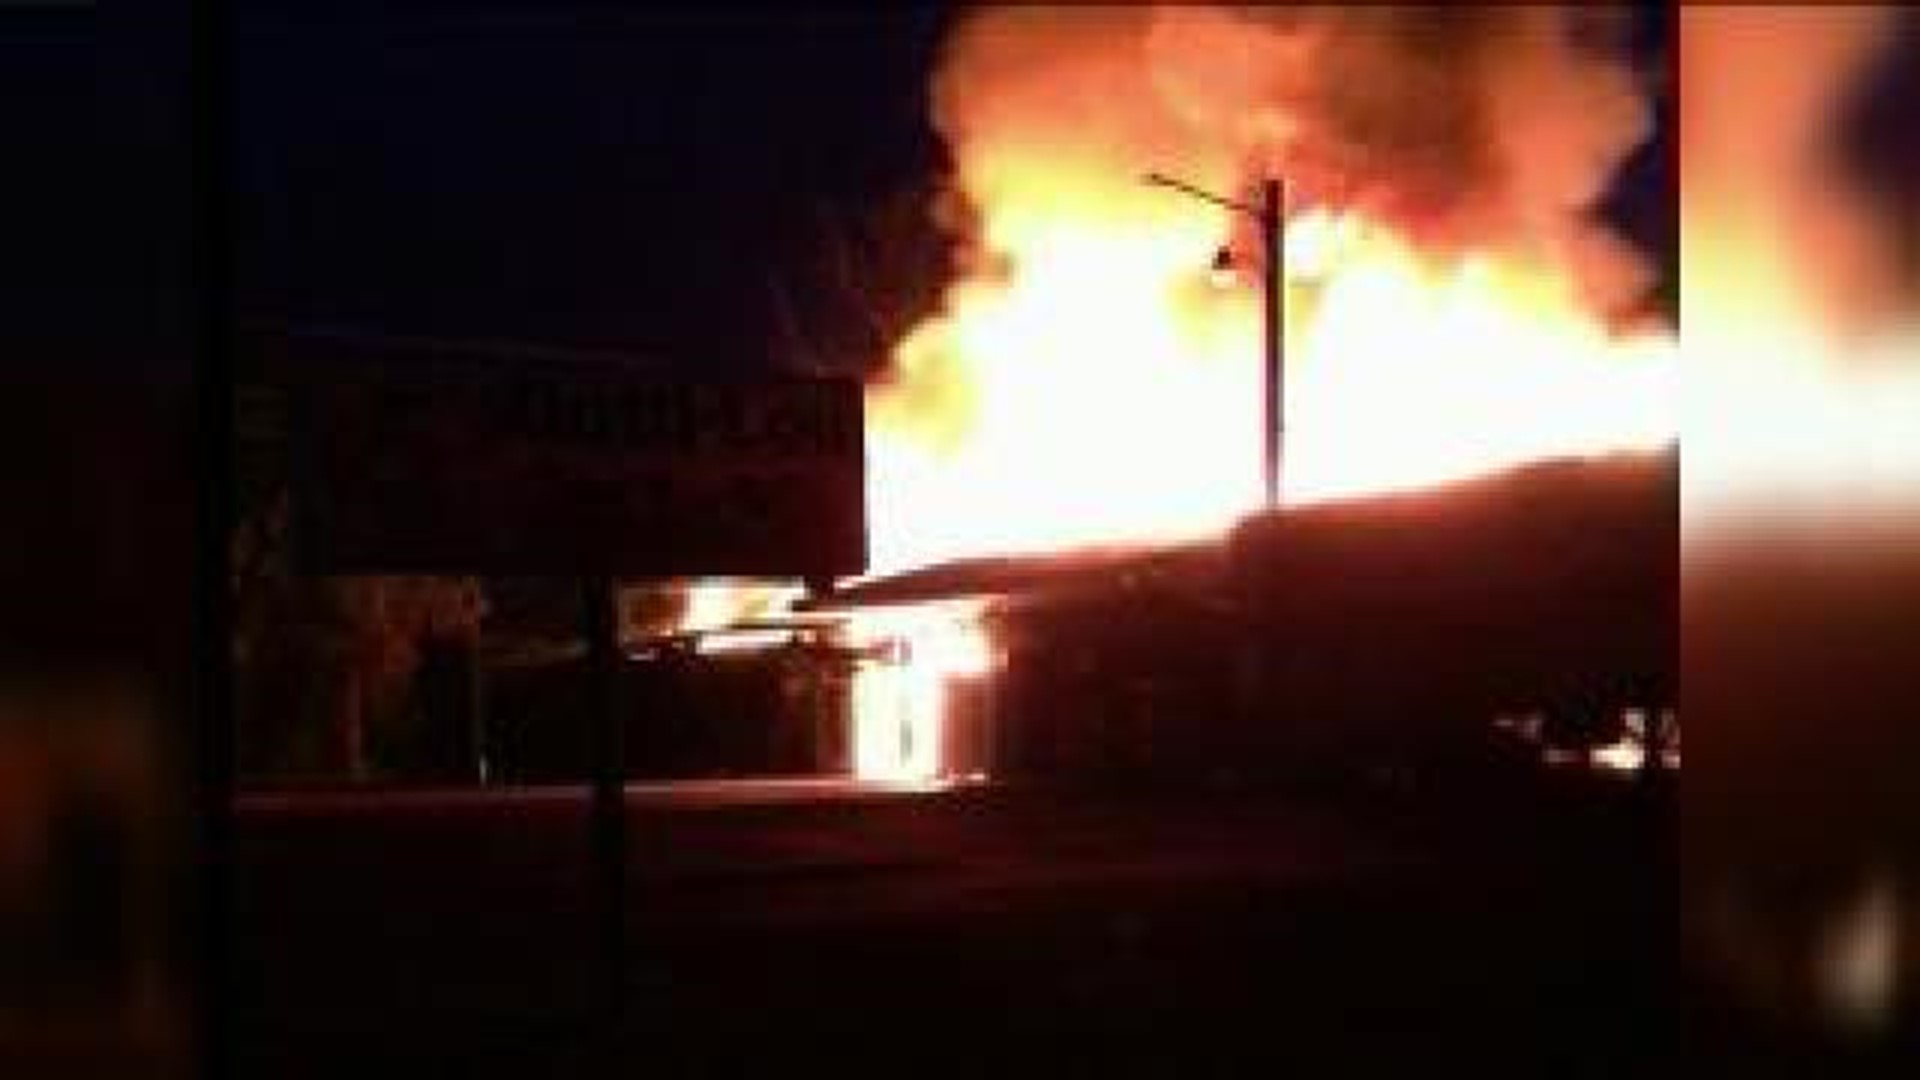 Gas Employees Help Shop Owner, Run Into Burning Building